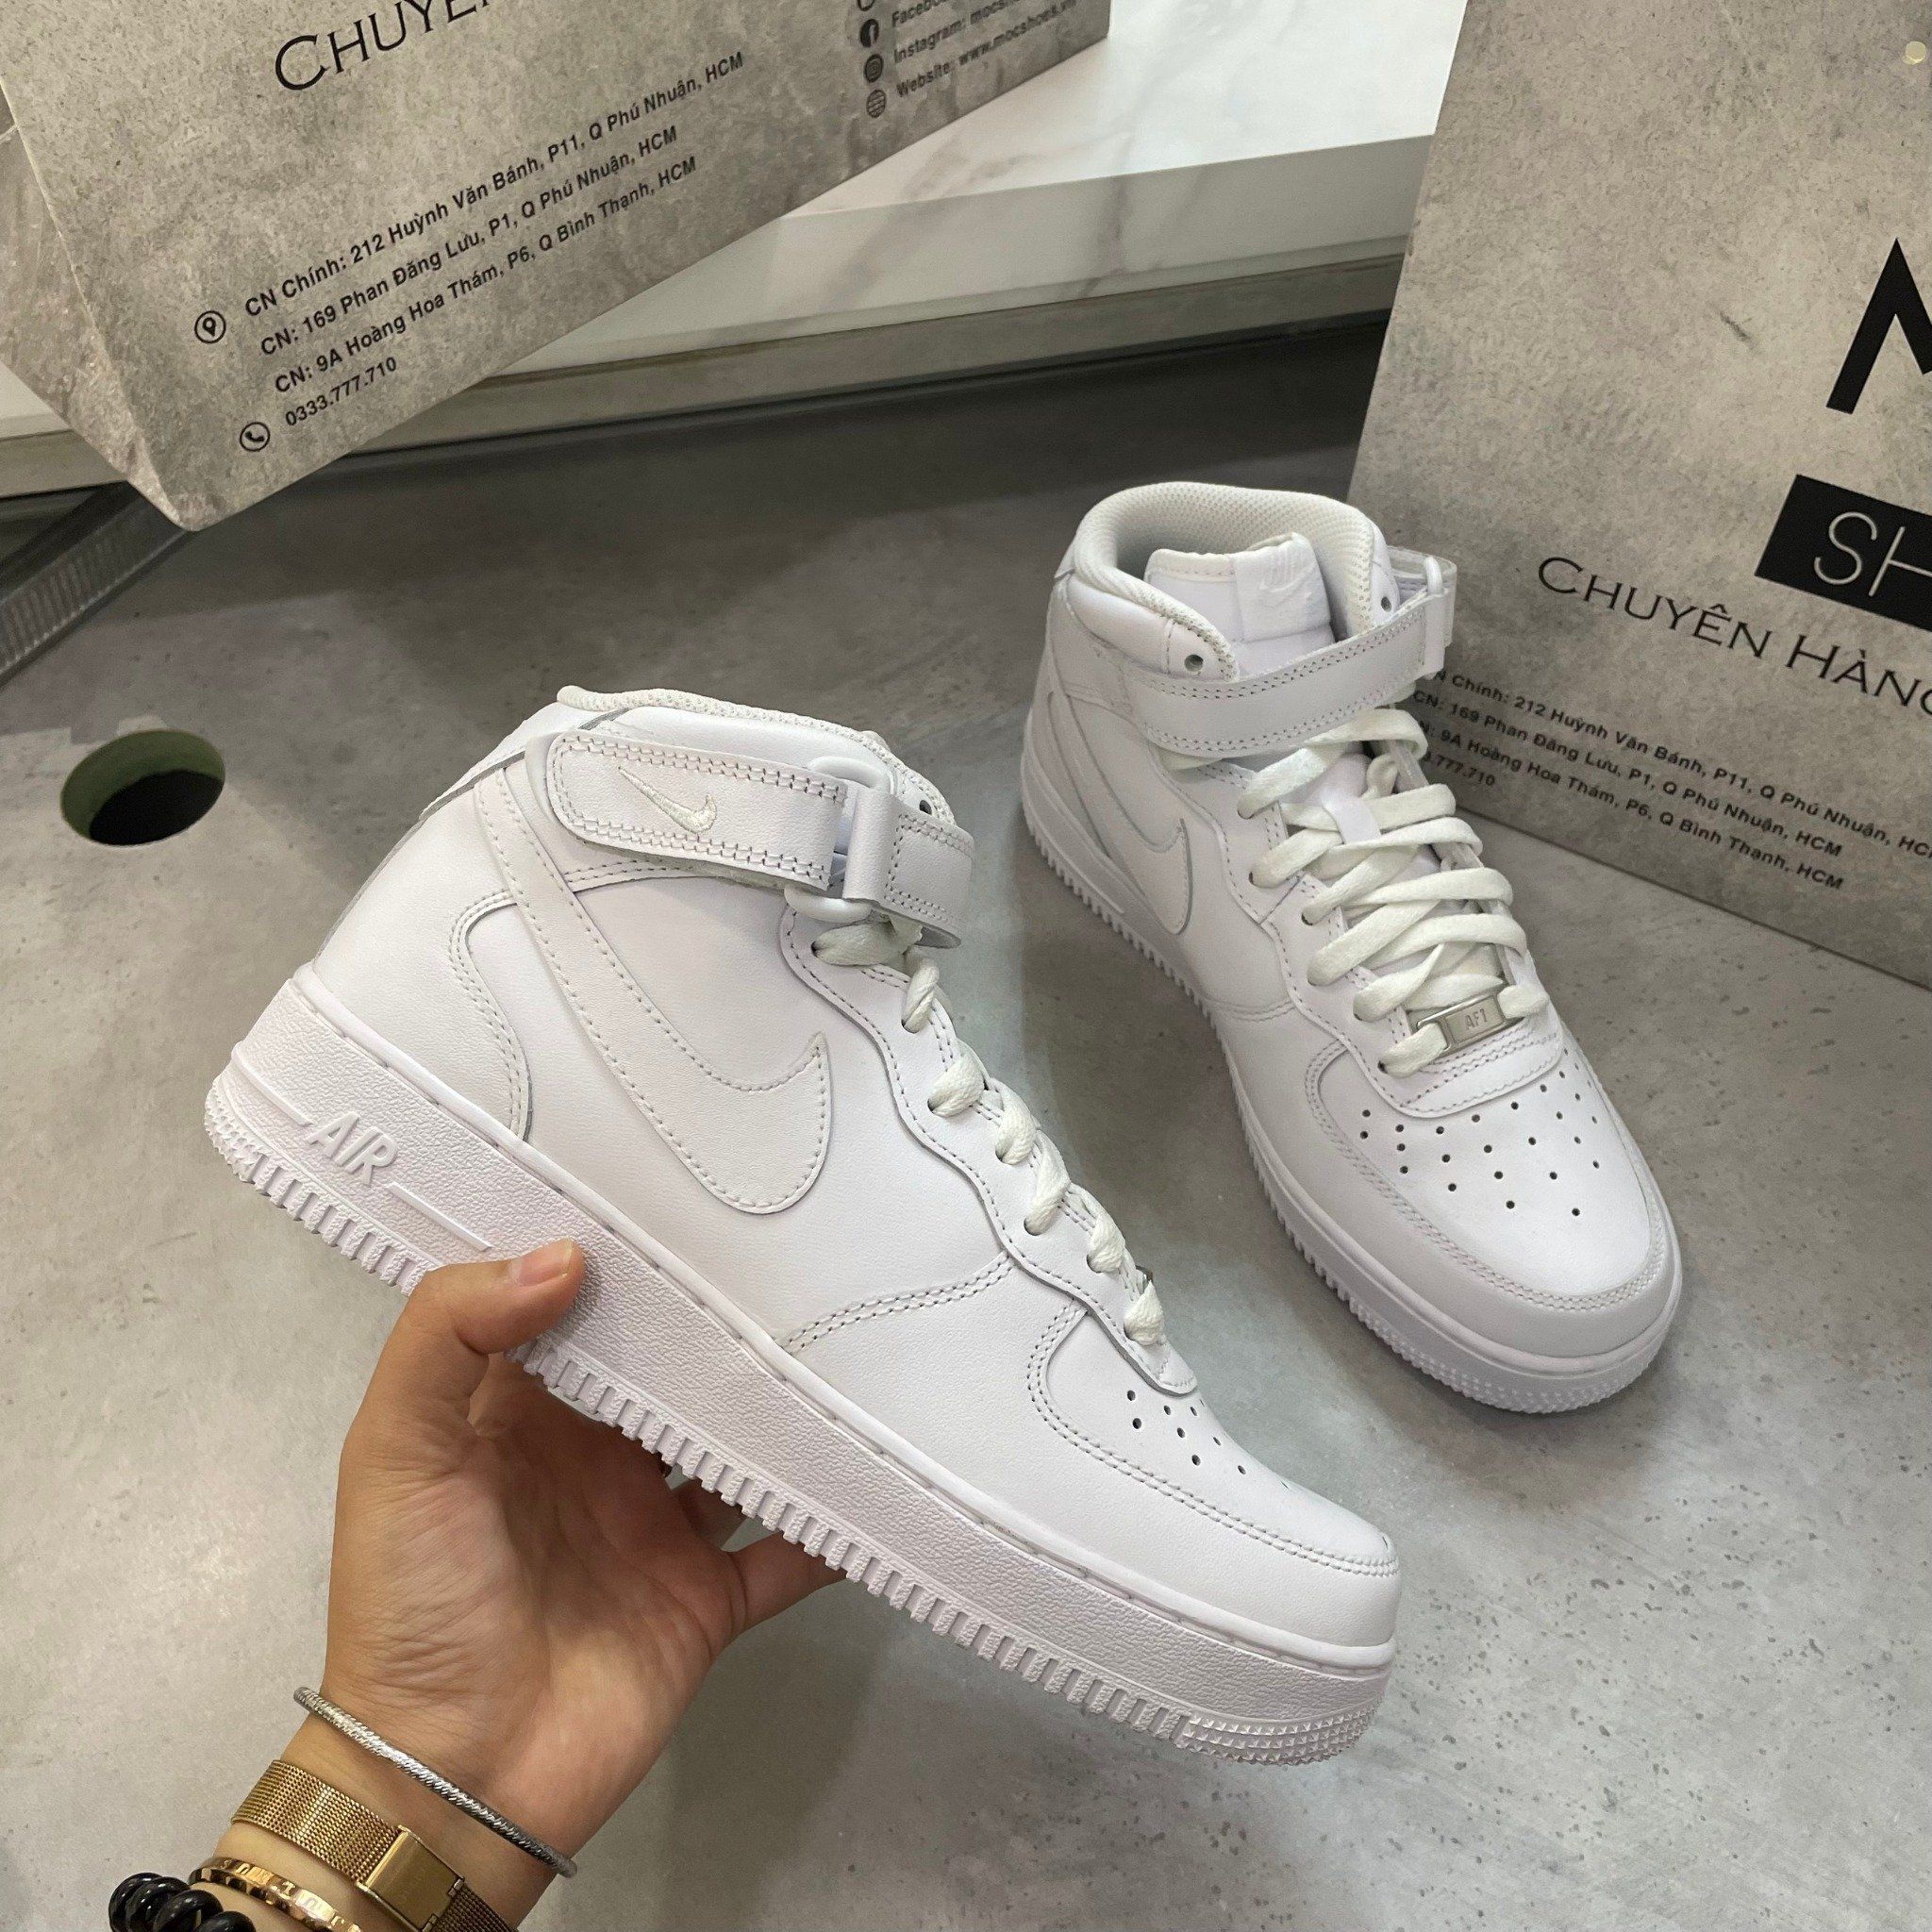  1672 - GIÀY THỂ THAO NIKE AIR FORCE 1 MID TRIPLE WHITE - CODE: CW2289111 